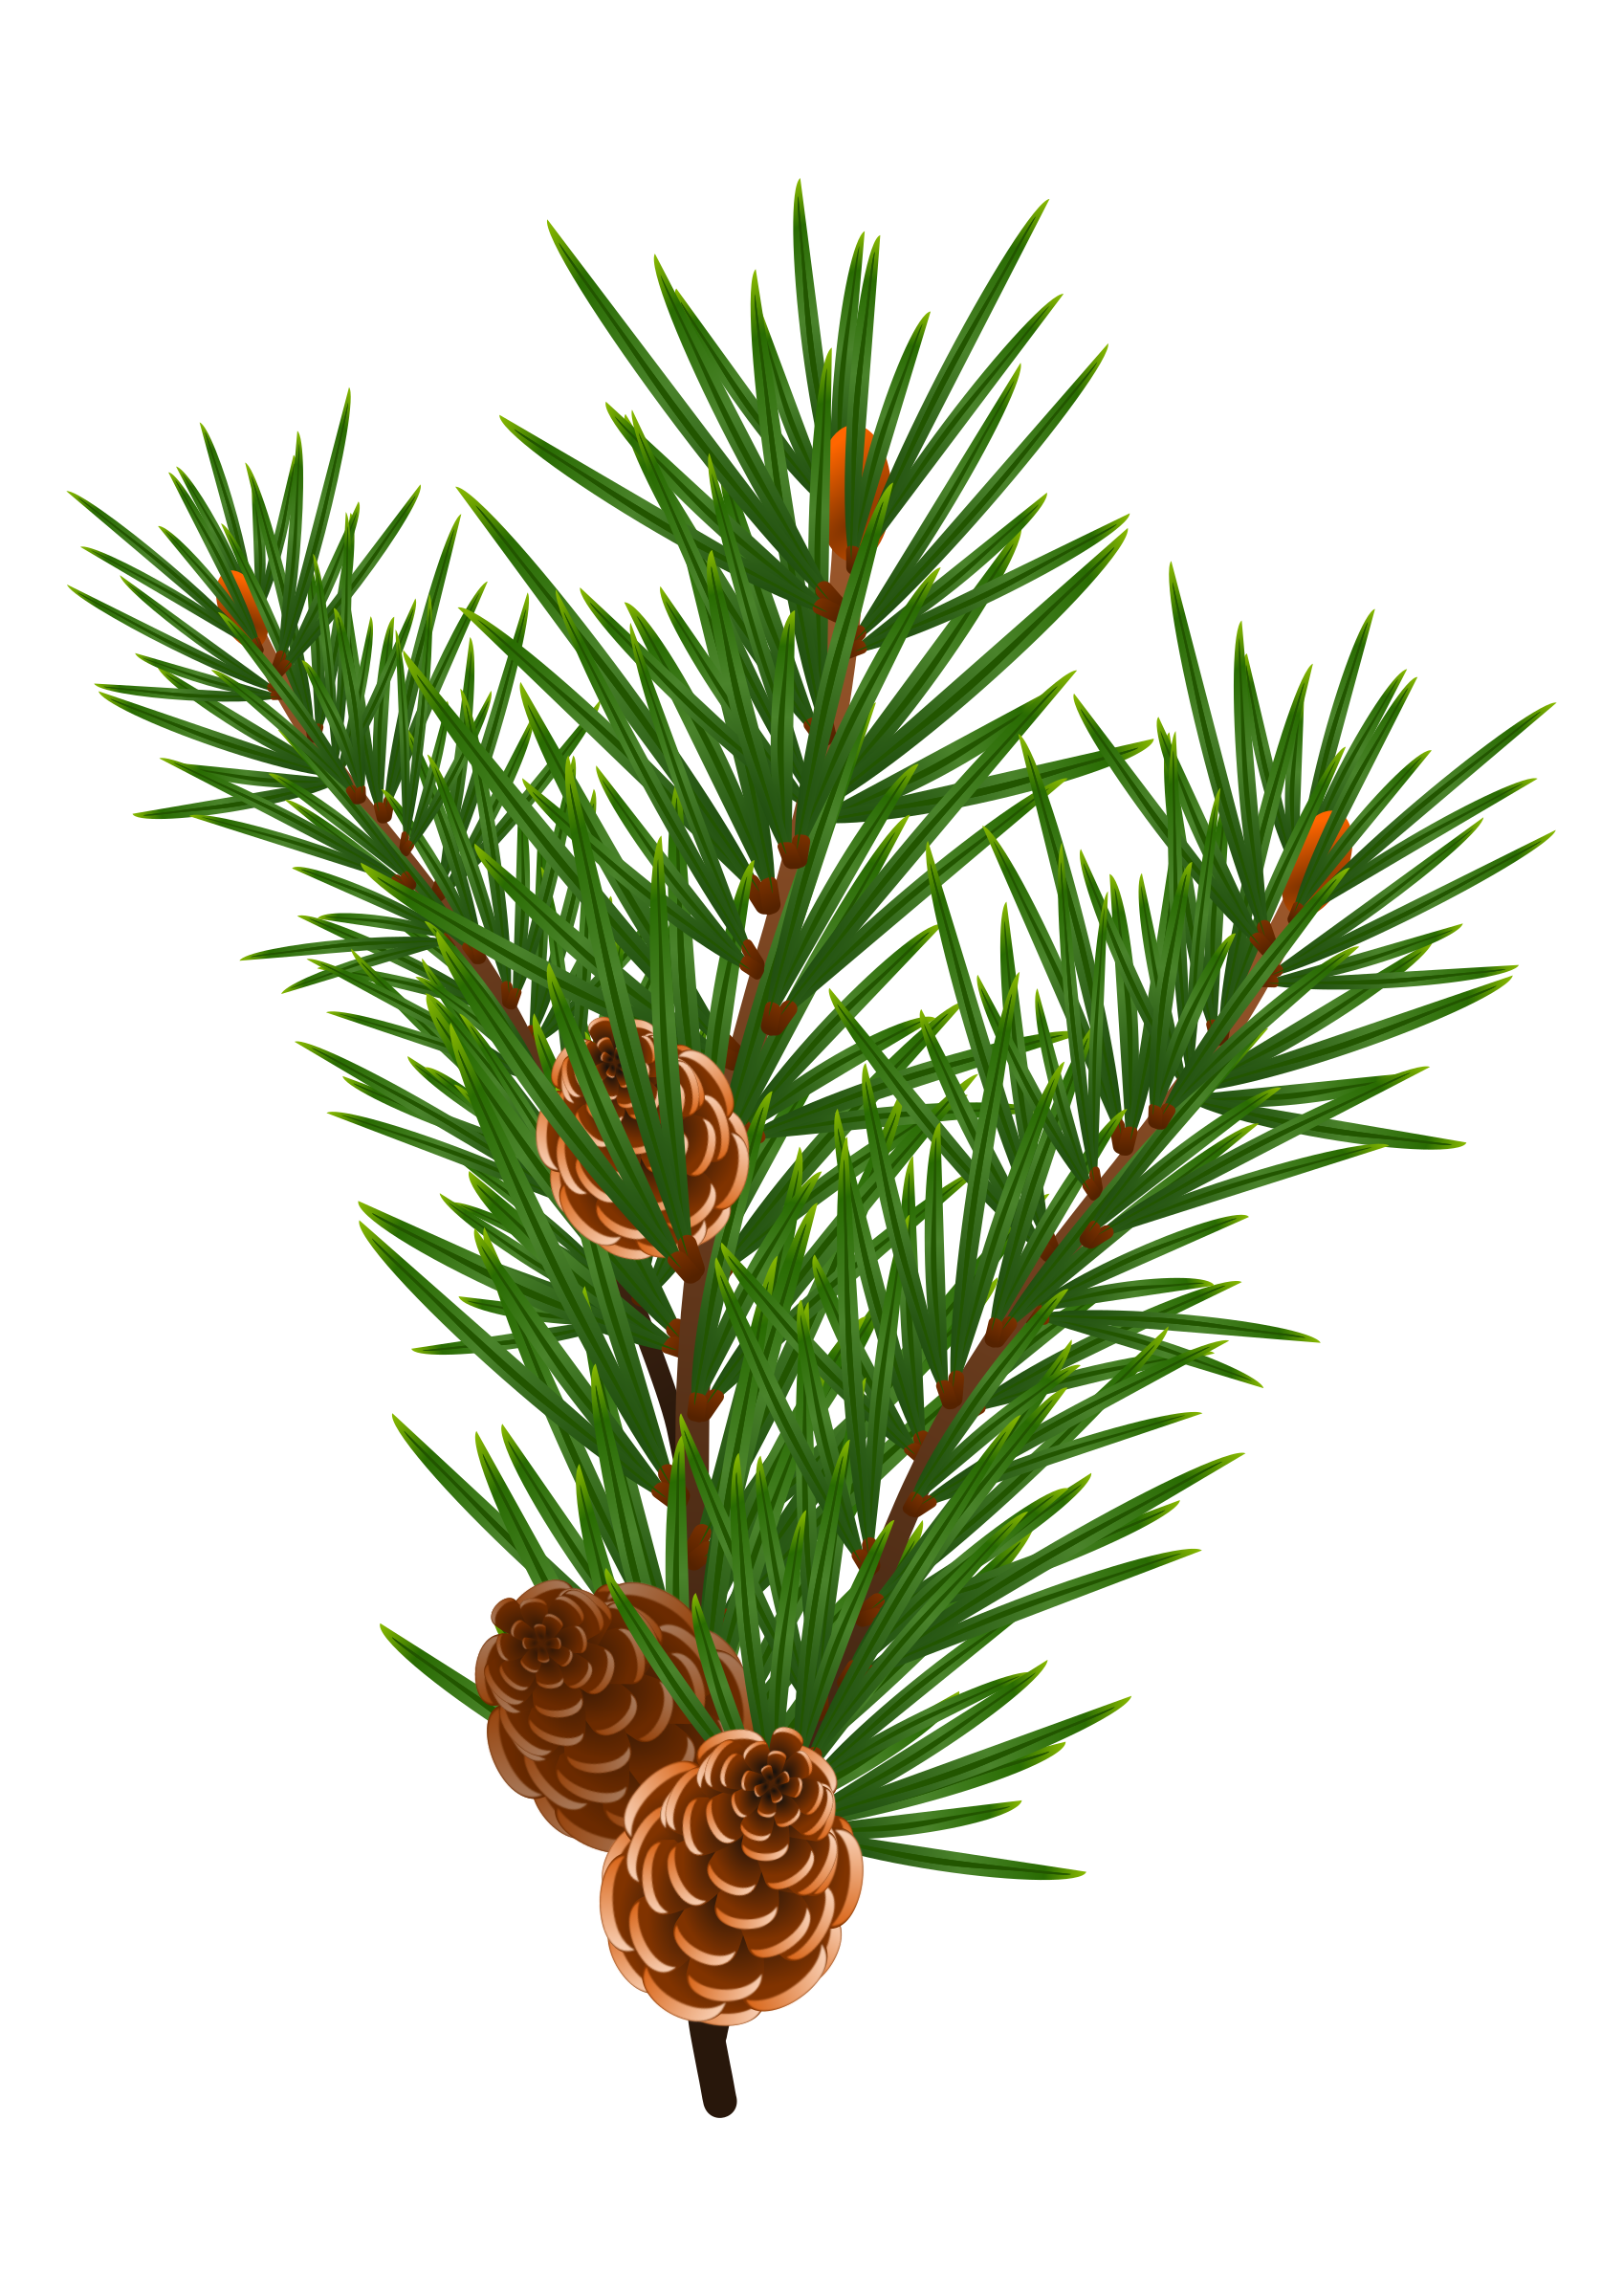 Pine Branch with Pine Cones Vector Clipart image - Free stock photo ...